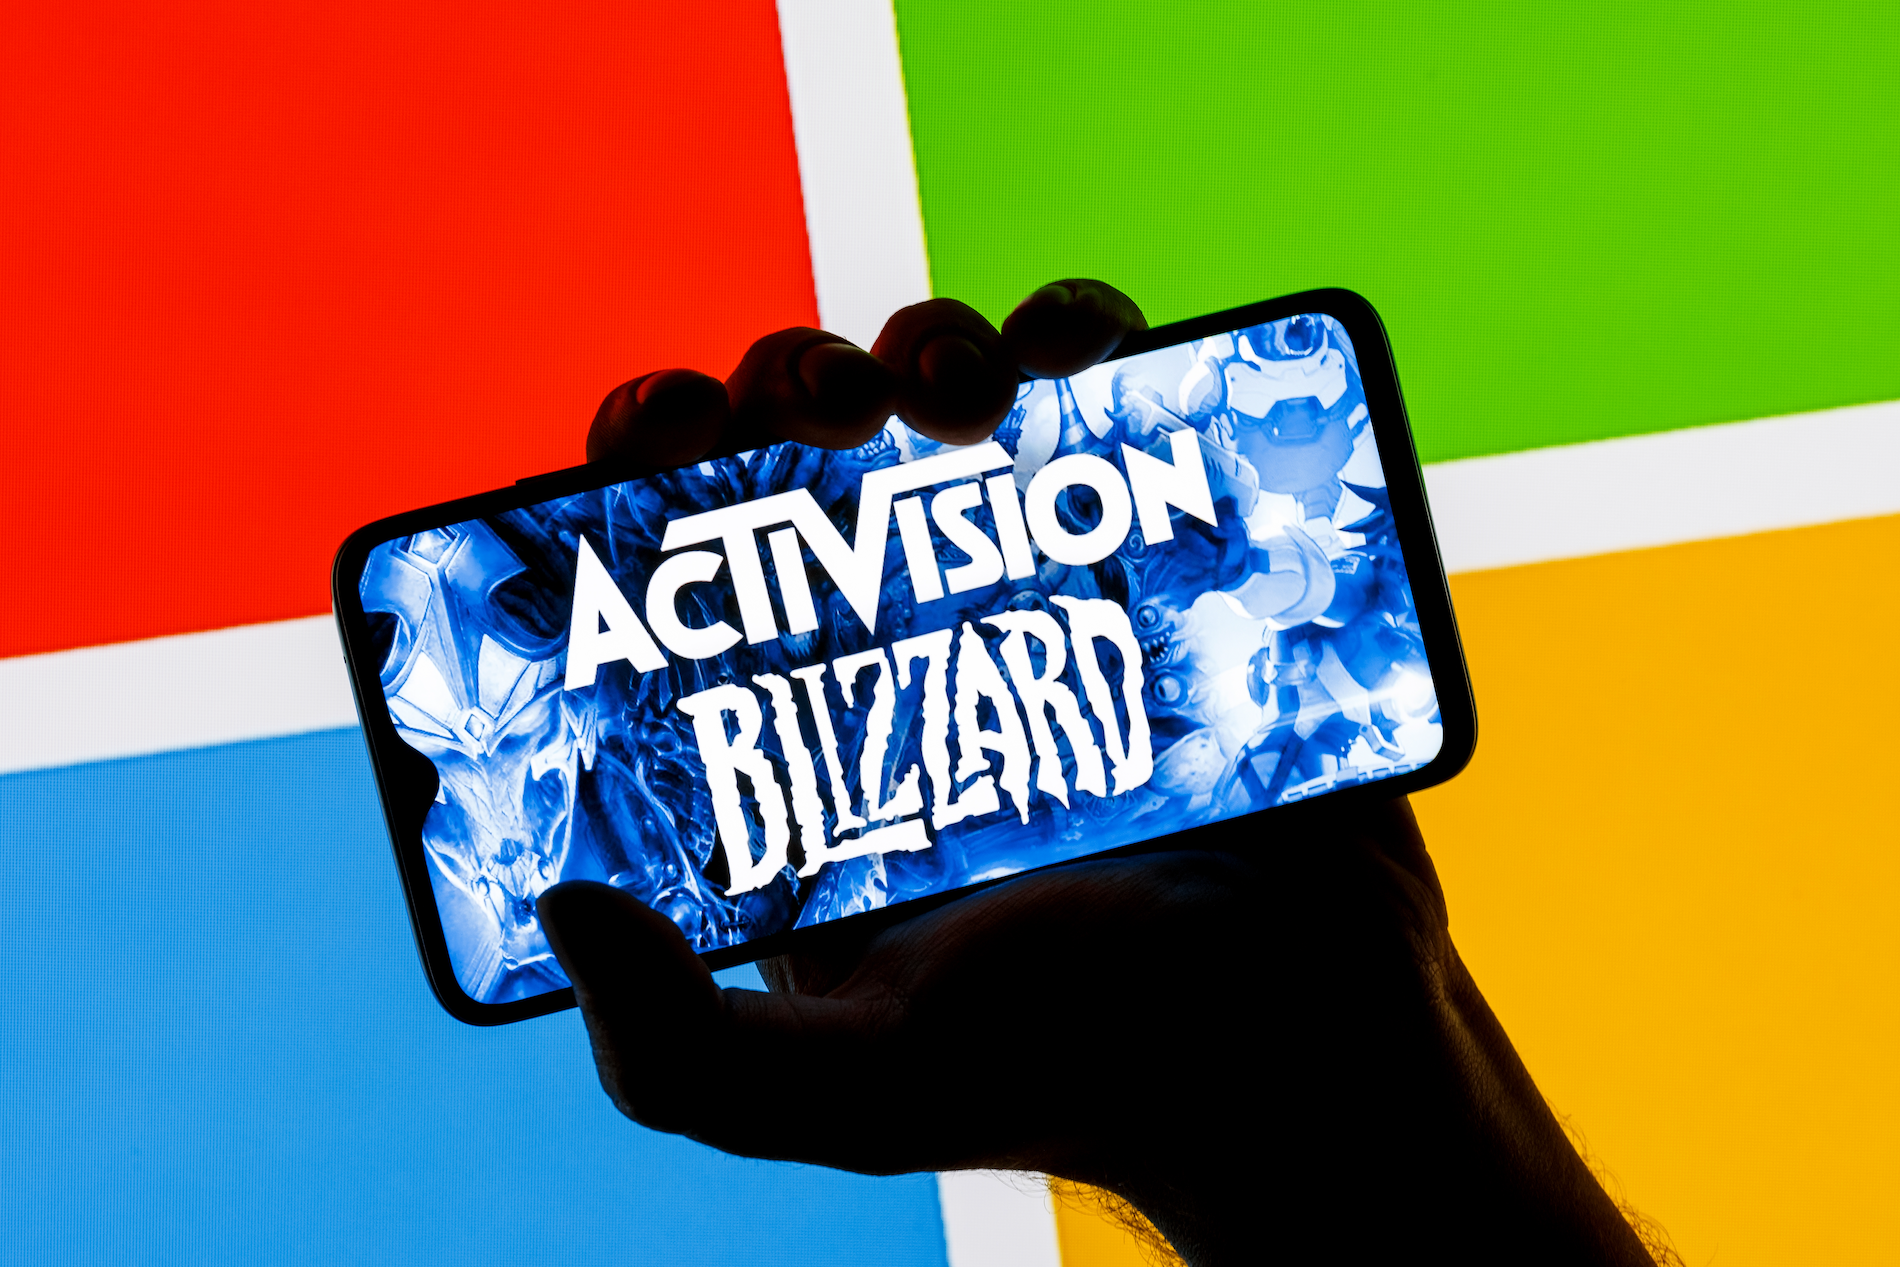 ctivision Blizzard logo on smartphone screen in hand against background of Microsoft logo. 